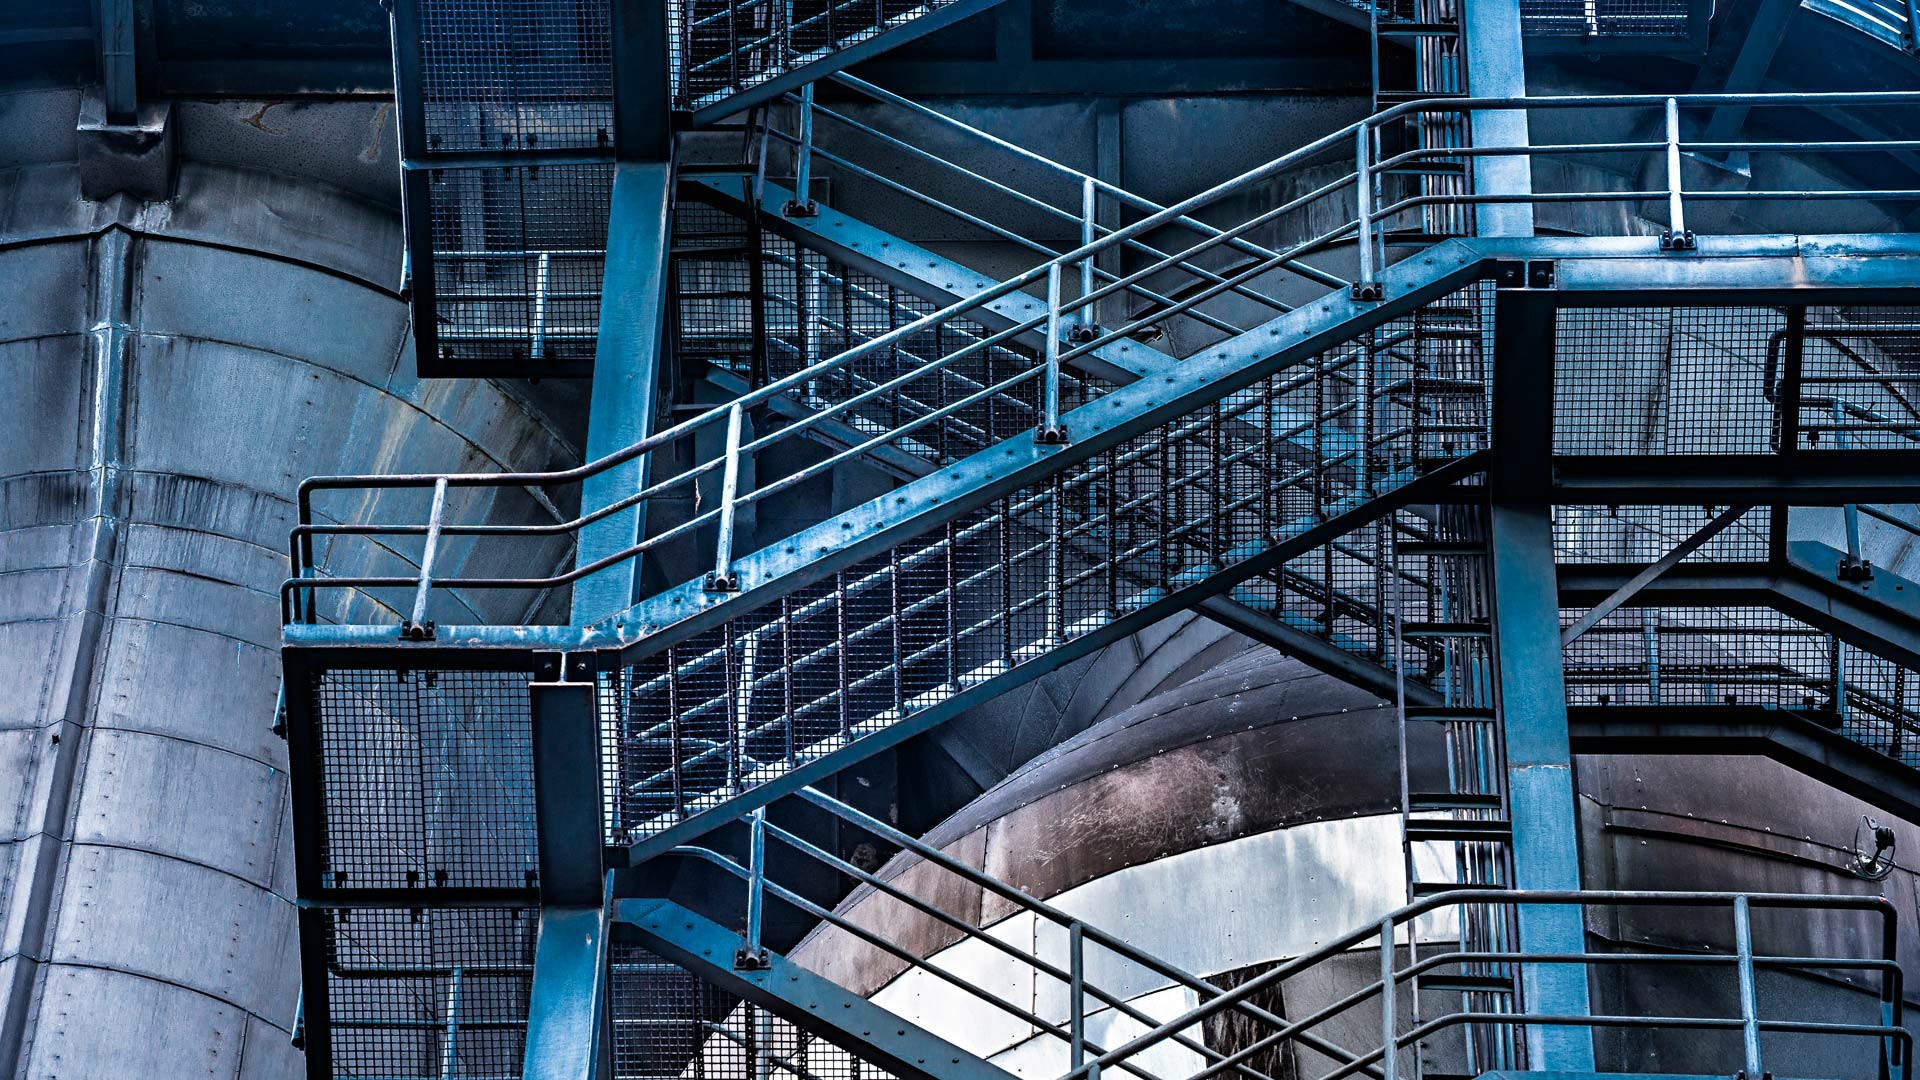 stairs, Factories, Building Wallpaper